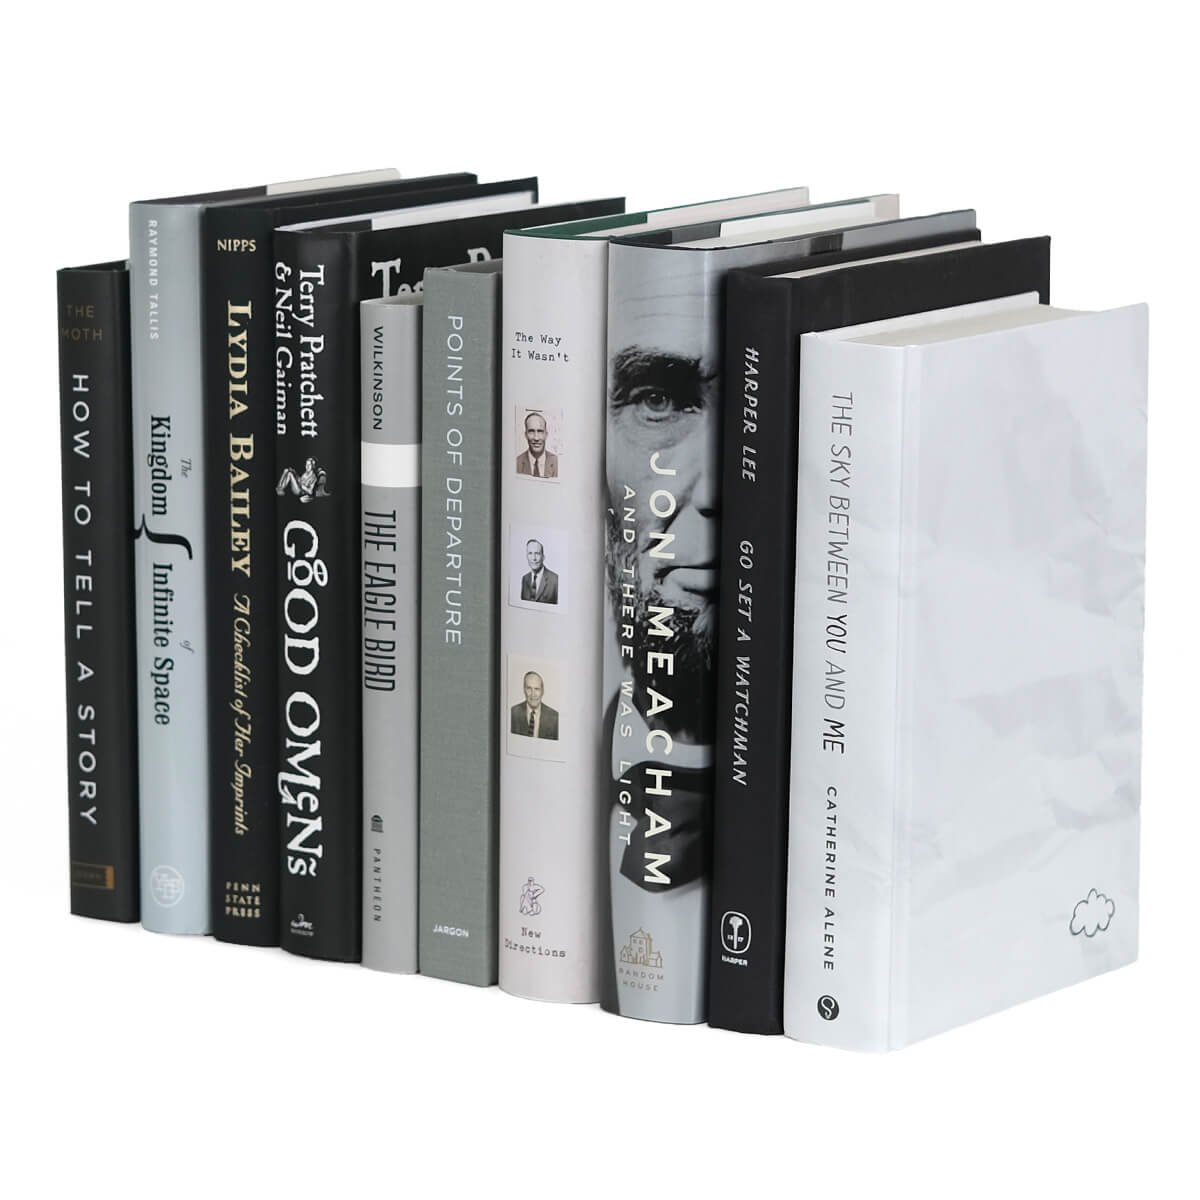 Curated by Color New Books by the Foot